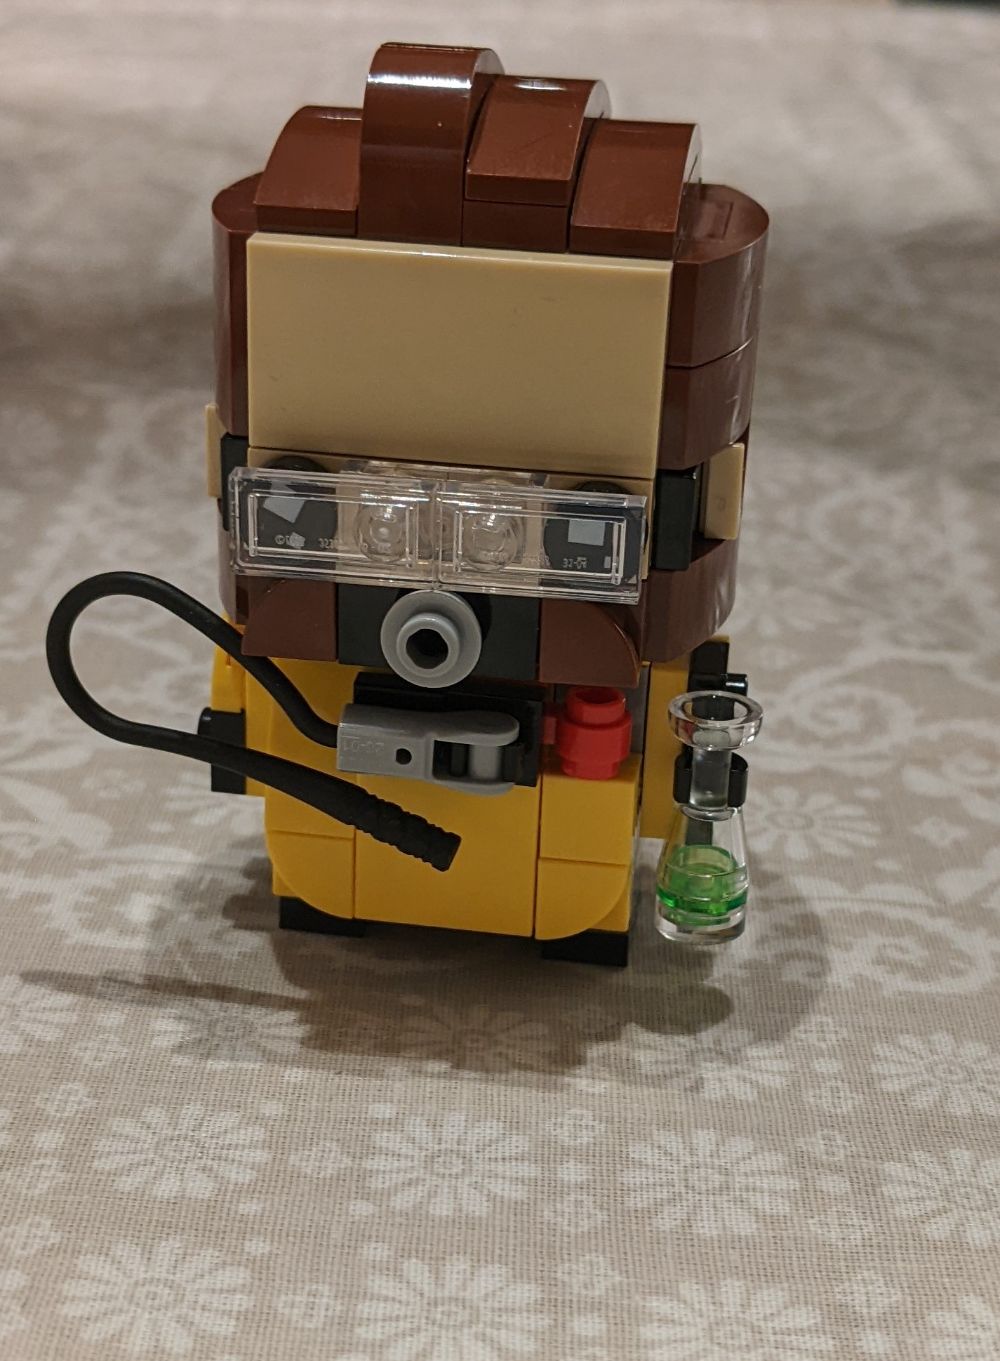 A Lego Brickheadz figure of the Apex Legends character Caustic - Caustic is holding a vial that is radioactive green